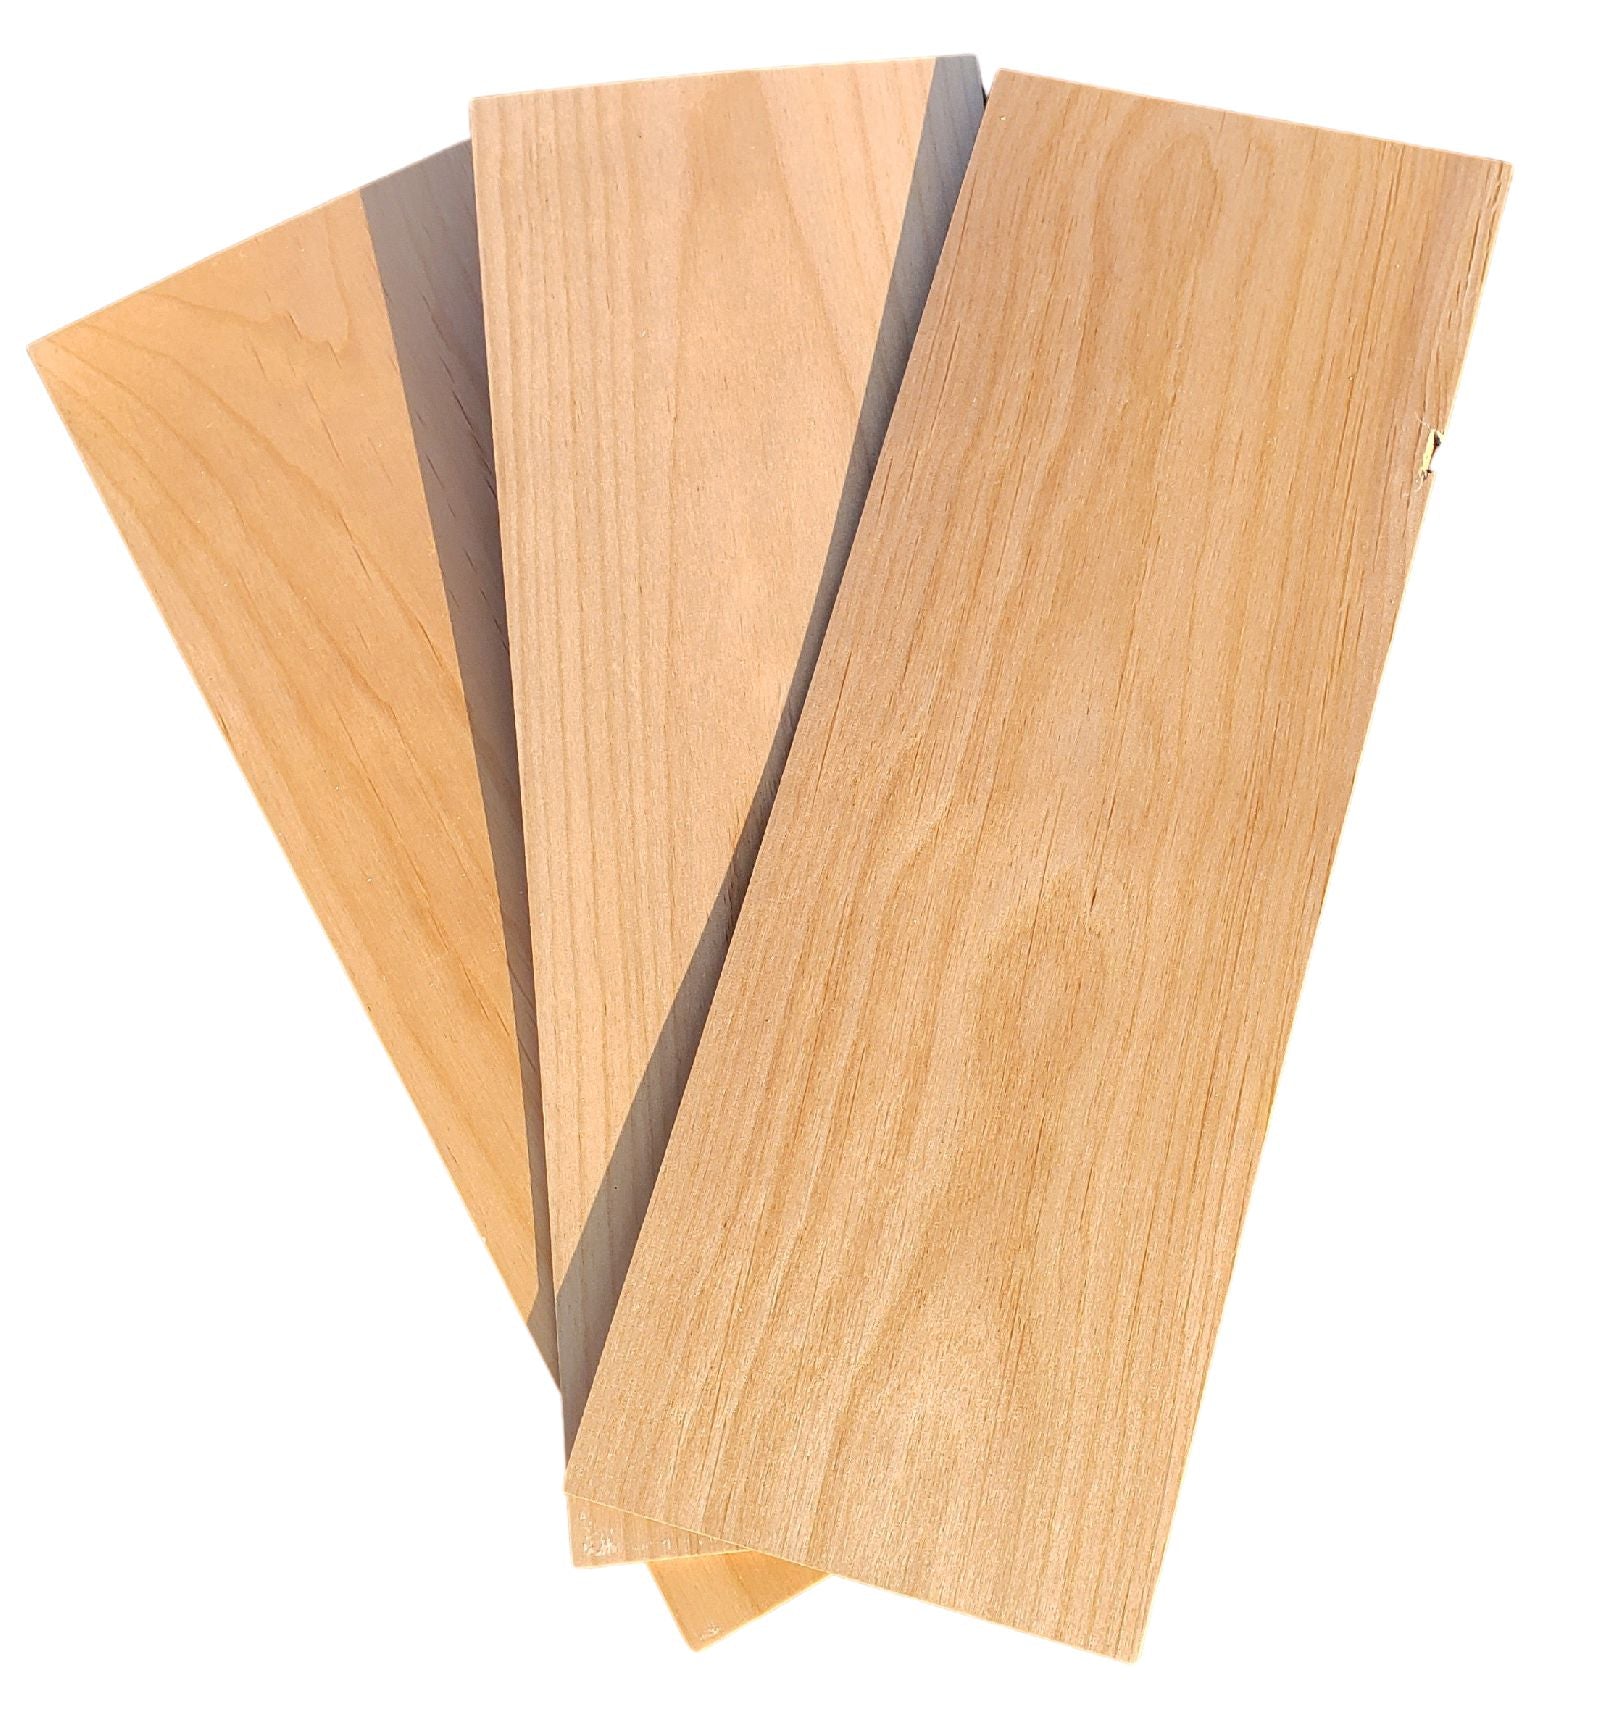 Alder Wood Strips, 1/8" thick 4.5x14.5 Pack of 7